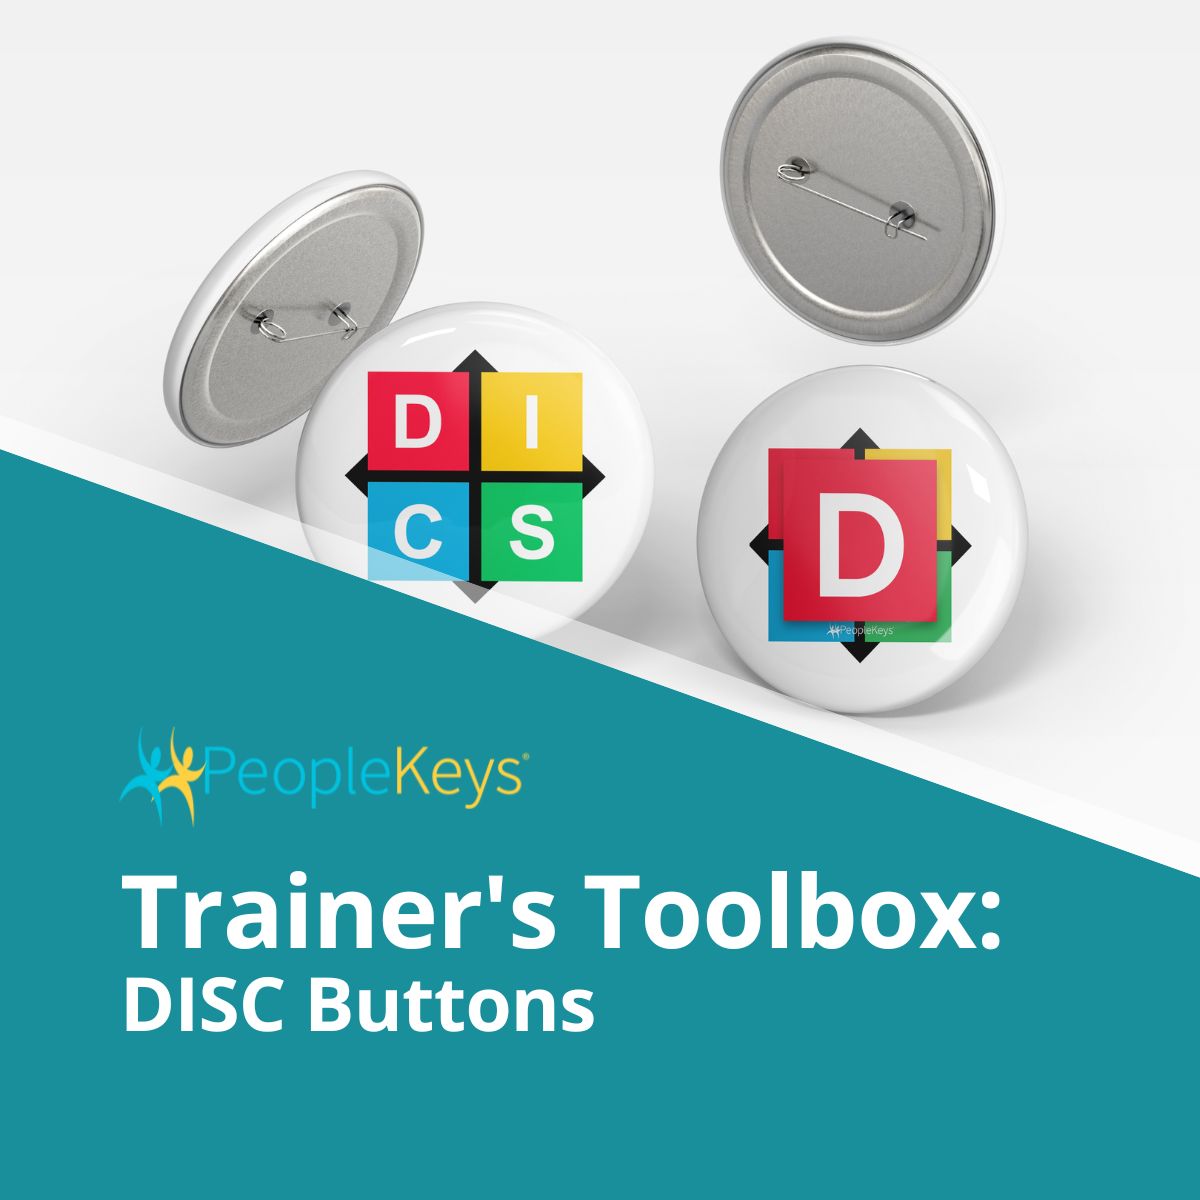 Trainer's Toolbox: DISC Buttons